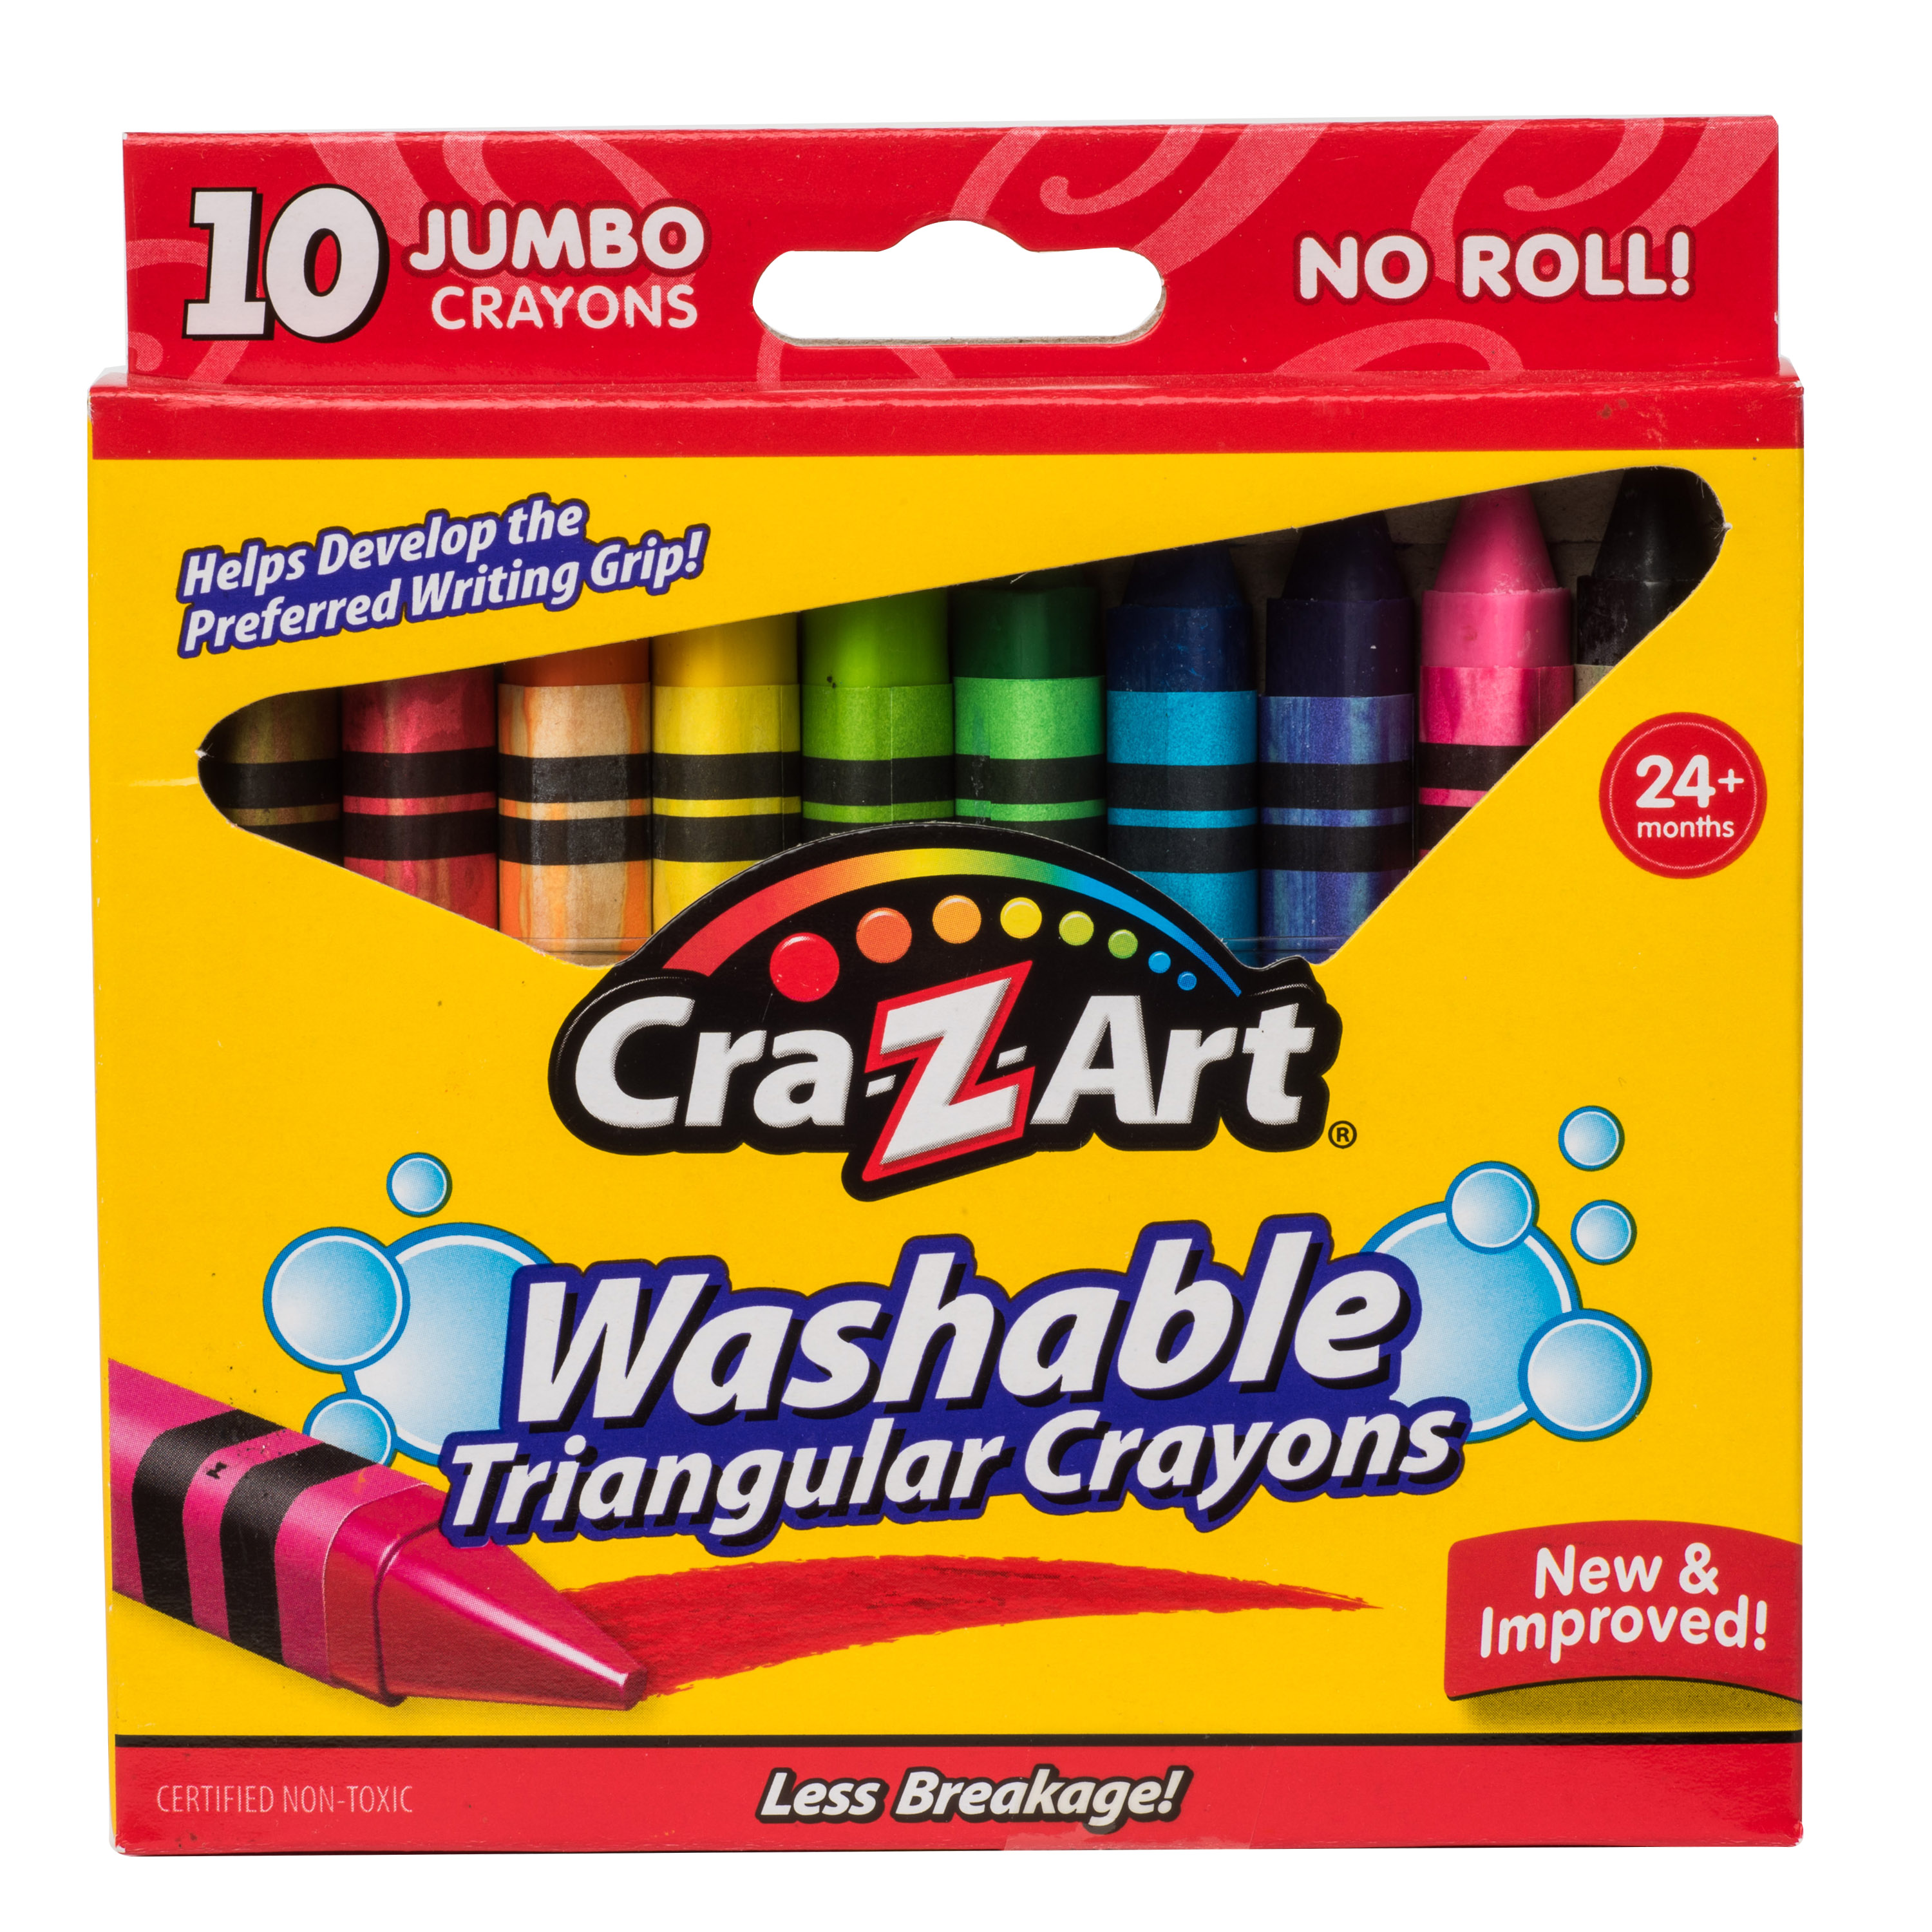 Cra-Z-Art Jumbo Washable Triangular Crayons, 10 Count, Assorted Colors, Back to School Supplies - image 1 of 9